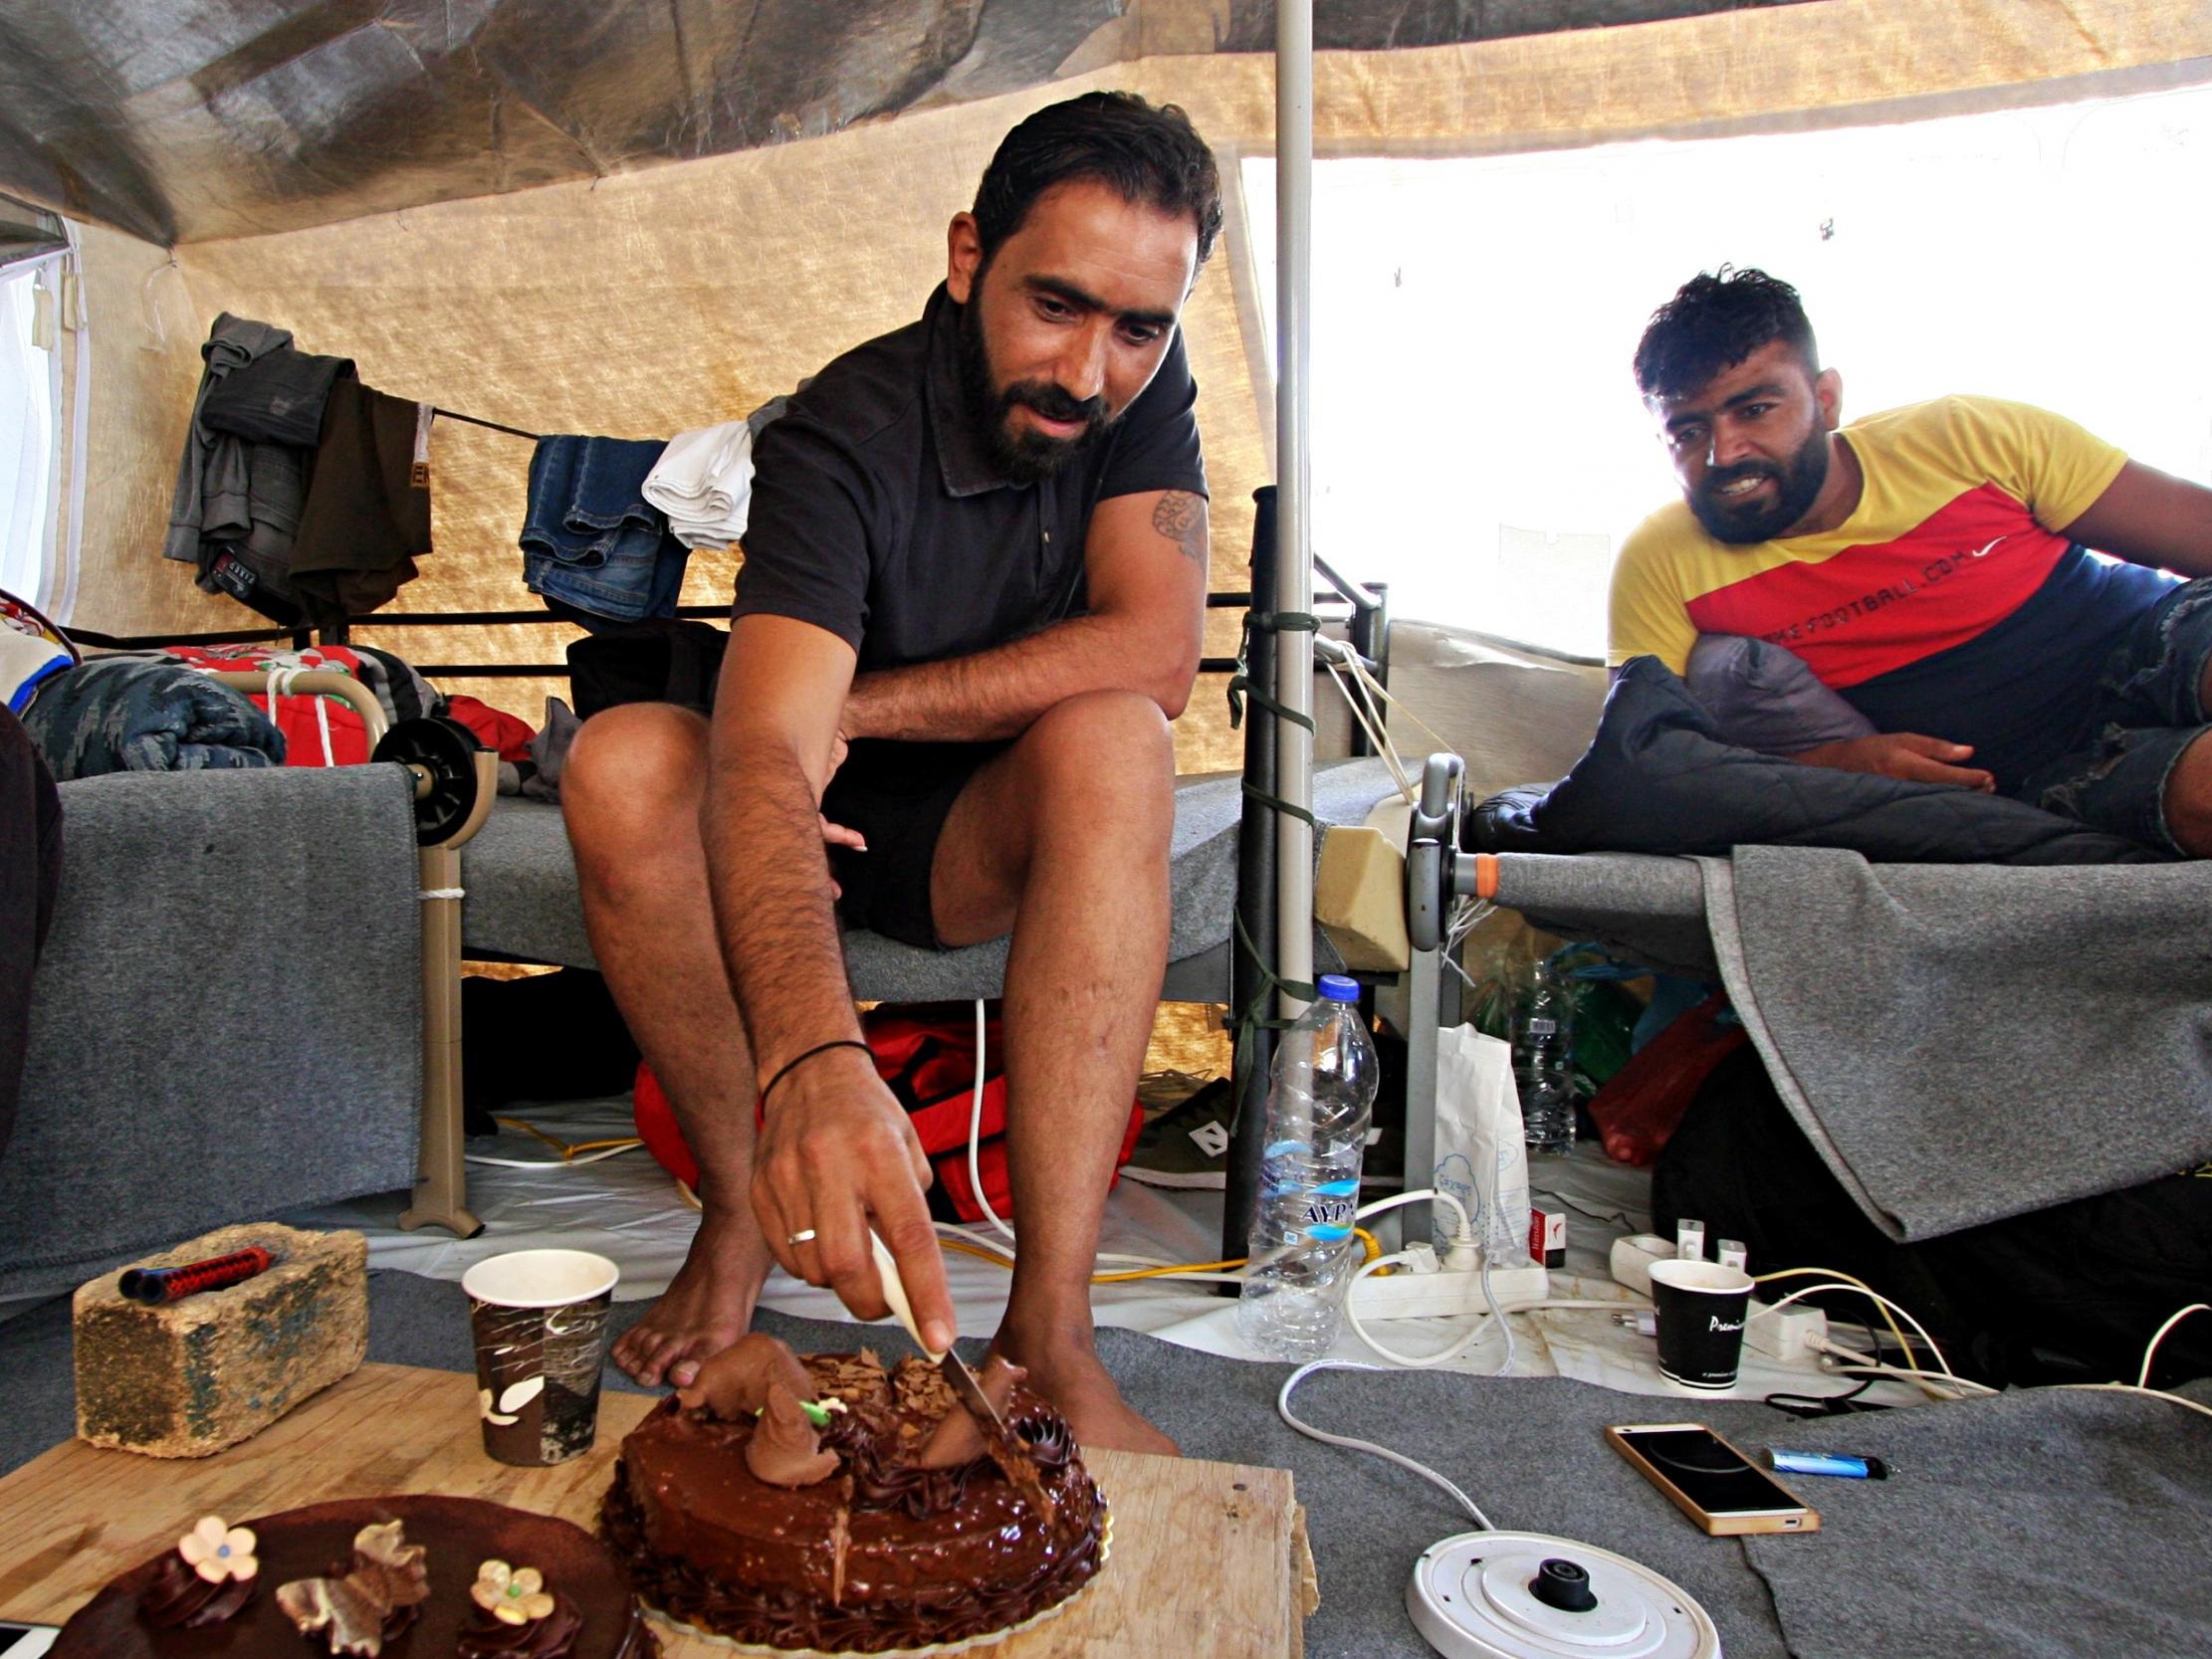 The Syrian refugee cuts his birthday cake in the tent he has called home for the last four months